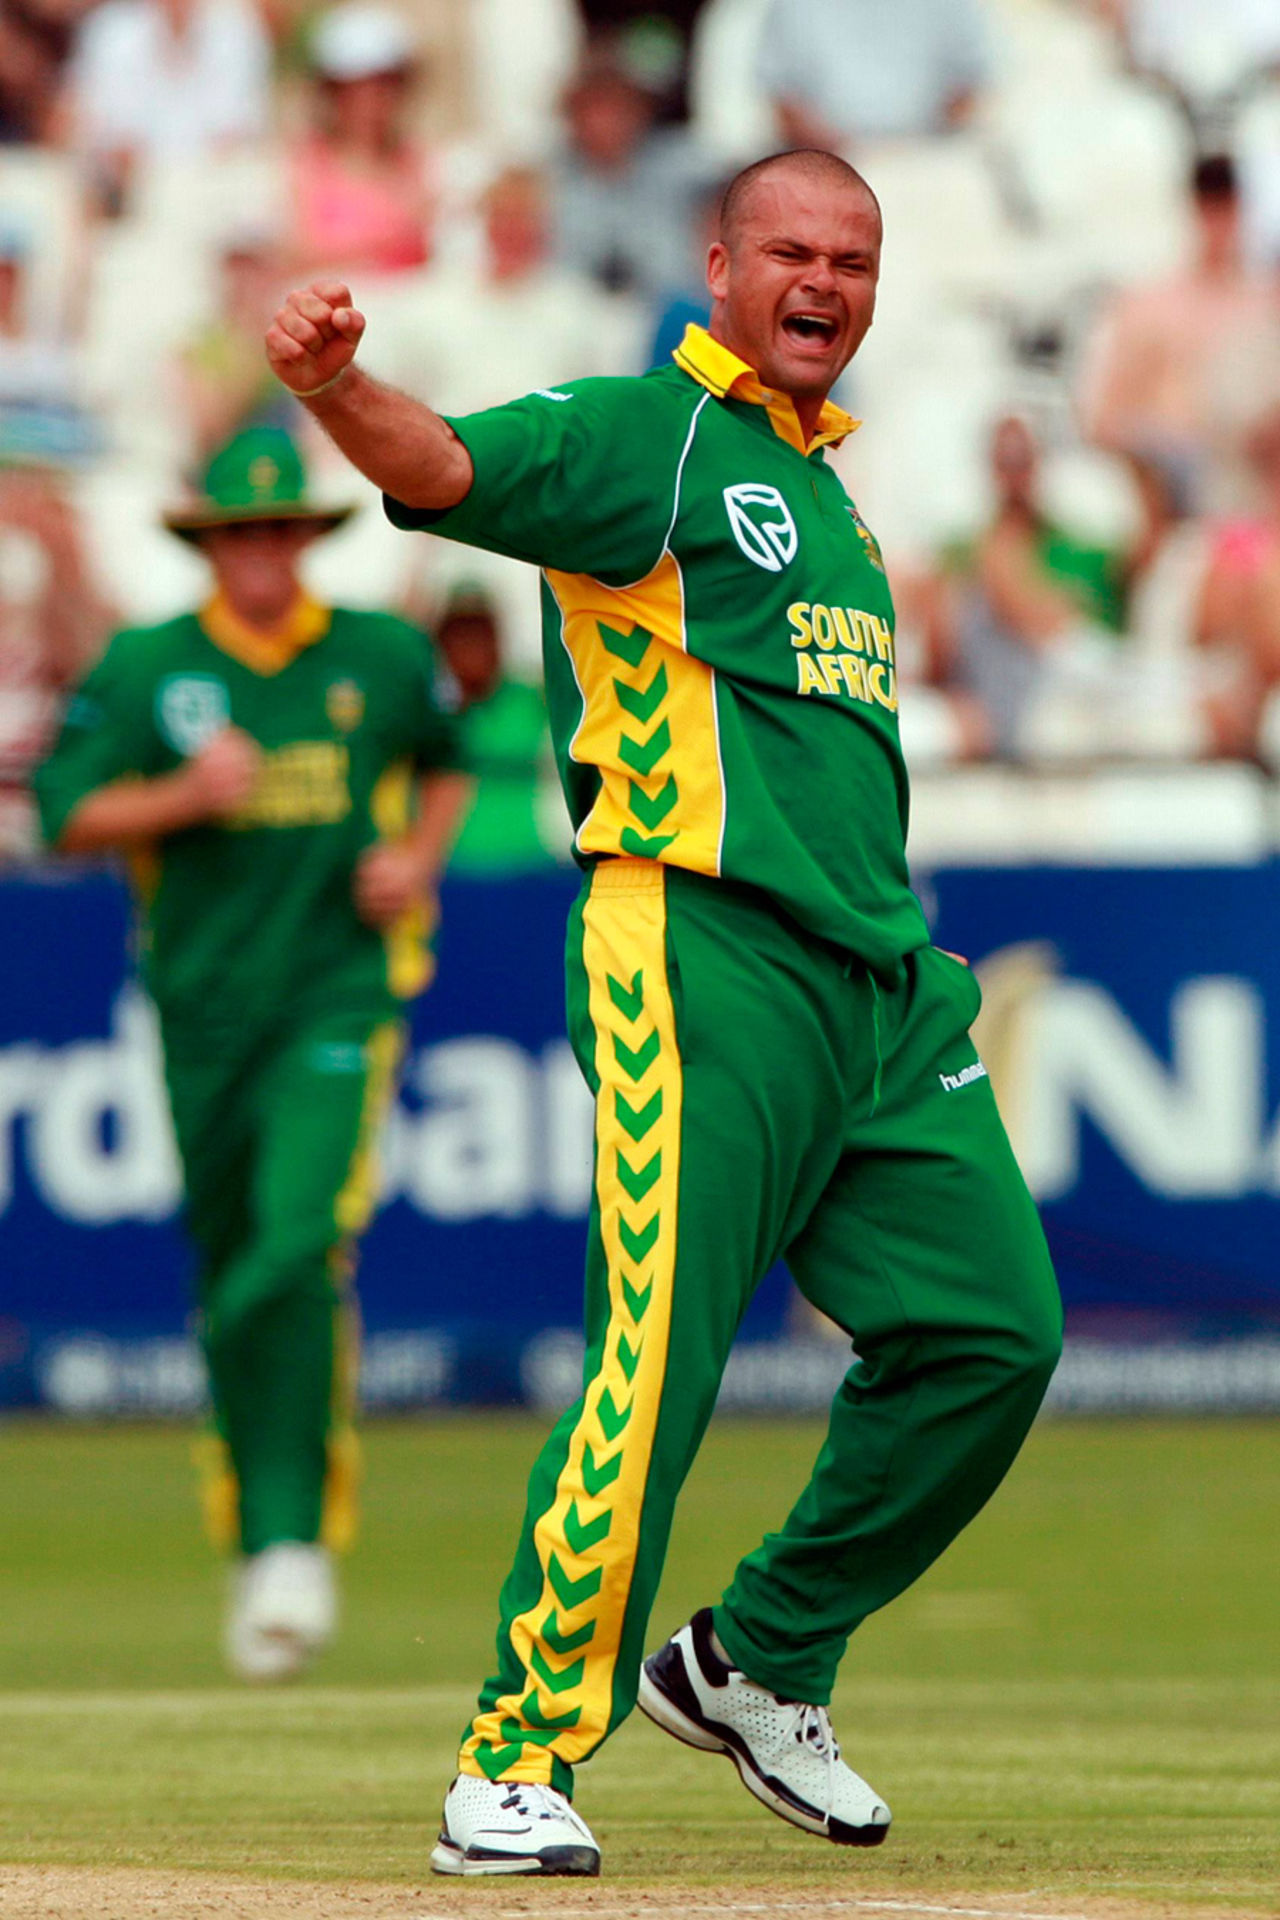 Charl Langeveldt celebrates after the first of his two wickets, South Africa v New Zealand, 3rd ODI, Cape Town, December 2, 2007